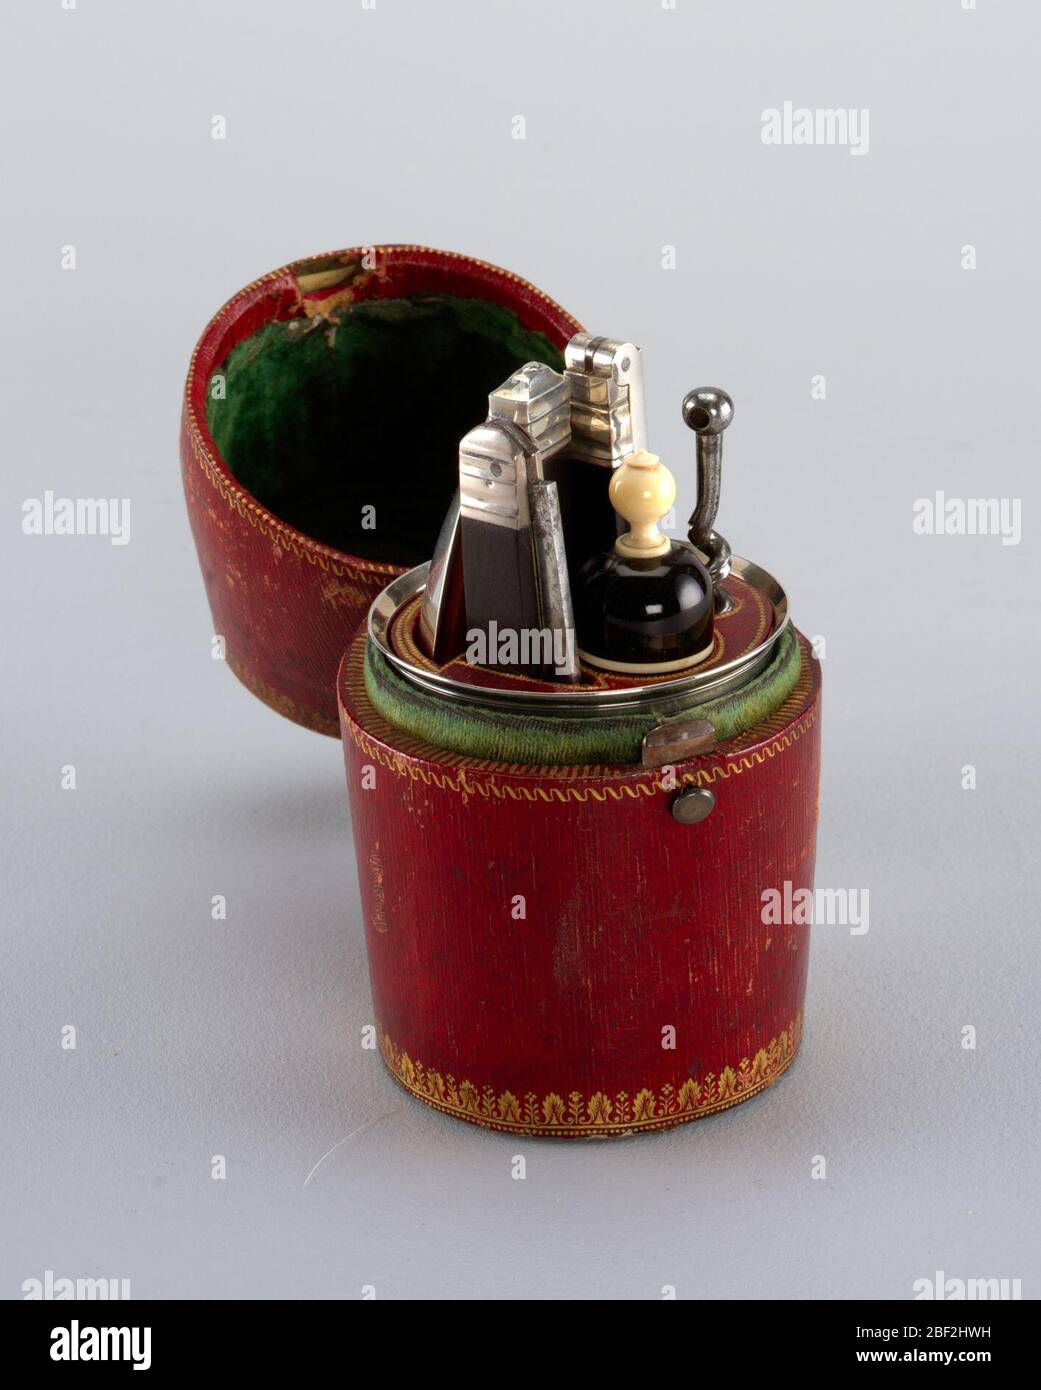 Case. Barrel-shaped red leather case with stamped gold decoration along the borders (bottom, centre, top). Case opens in the centre, small press button on front, hinge on back. Inside covered in green velvet. Small press-button on the front, hinge on back. Stock Photo